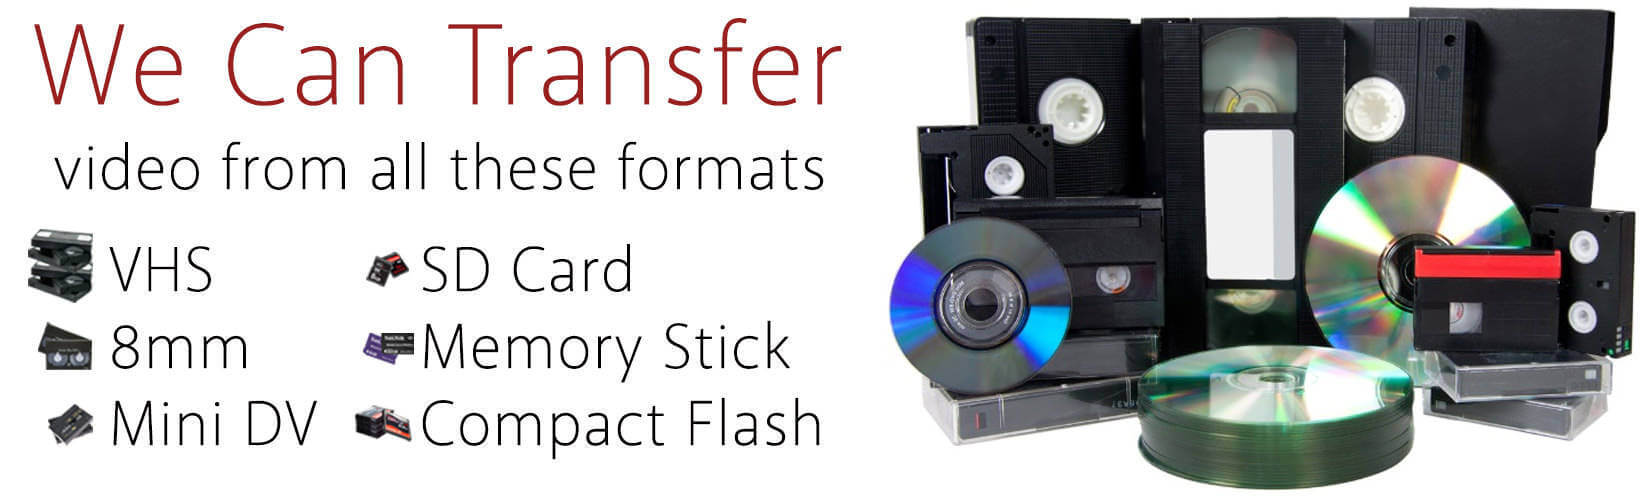 Convert VHS Video Tapes to USB or DVD, Camcorder Tapes, VHS, VCR